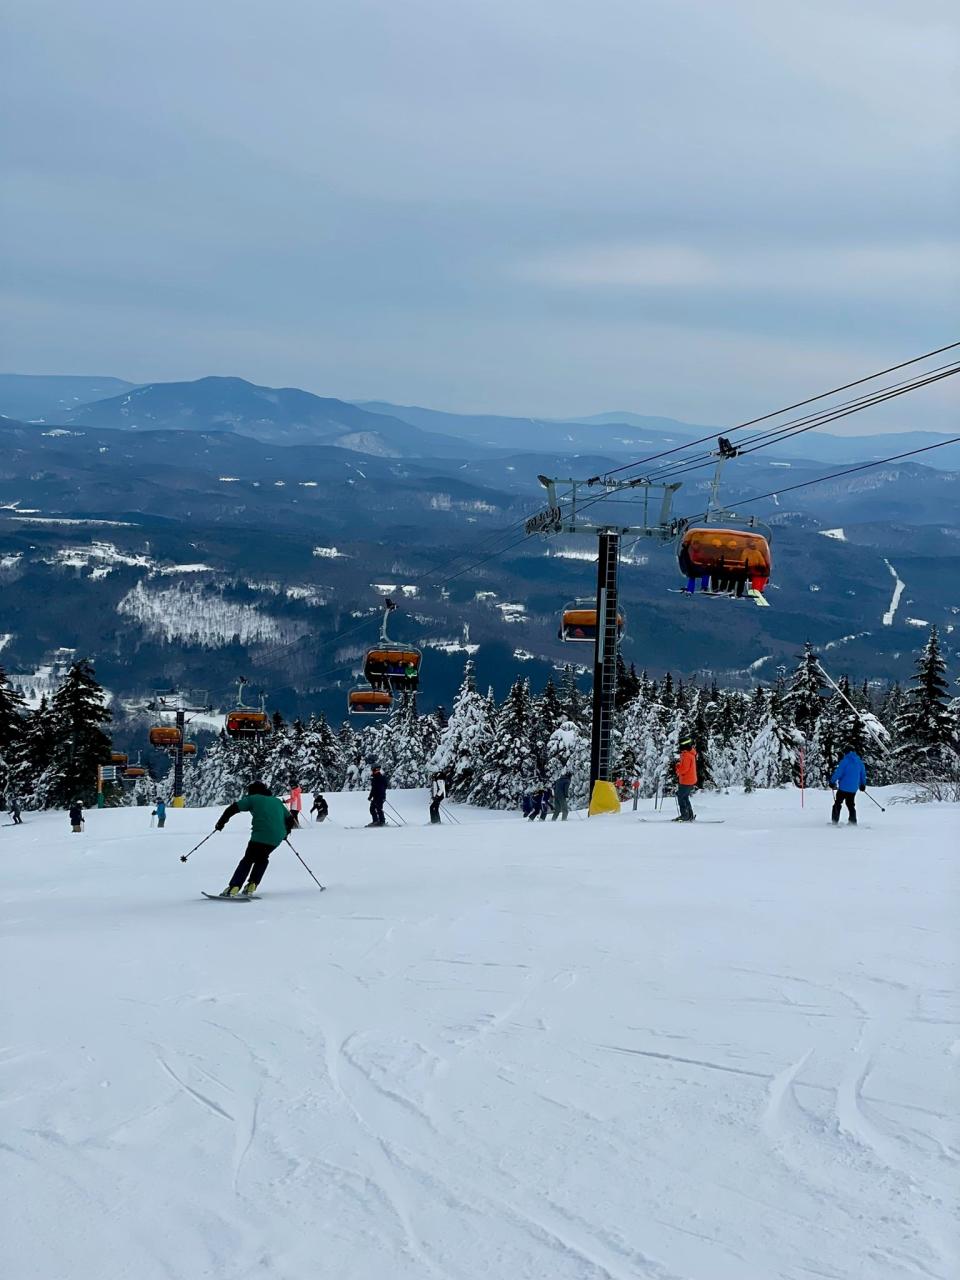 The view from Okemo last weekend.